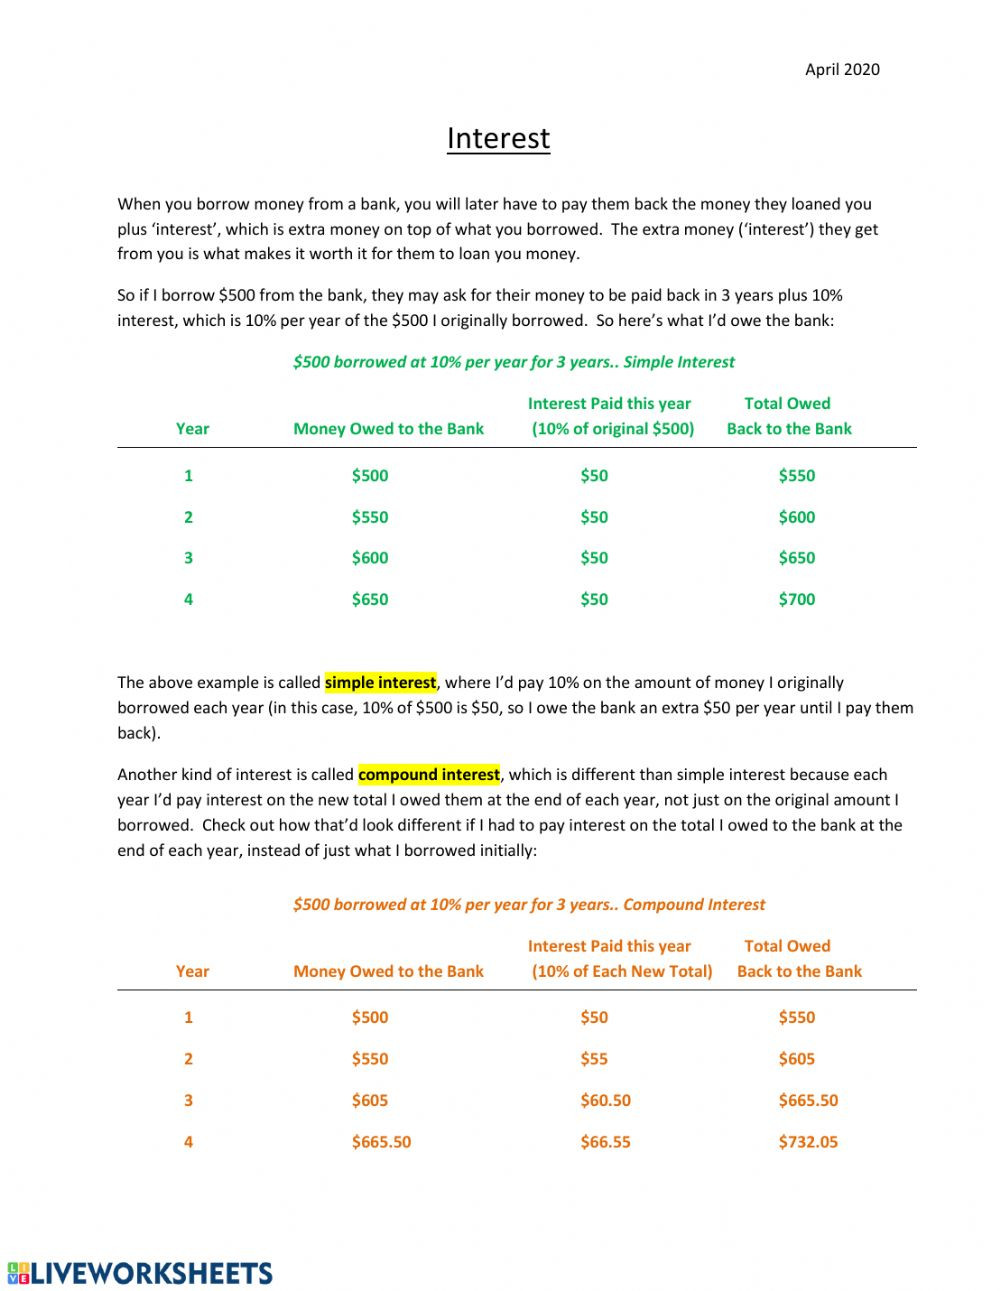 Simple and Compound Interest Worksheet Simple Vs Pound Interest Interactive Worksheet